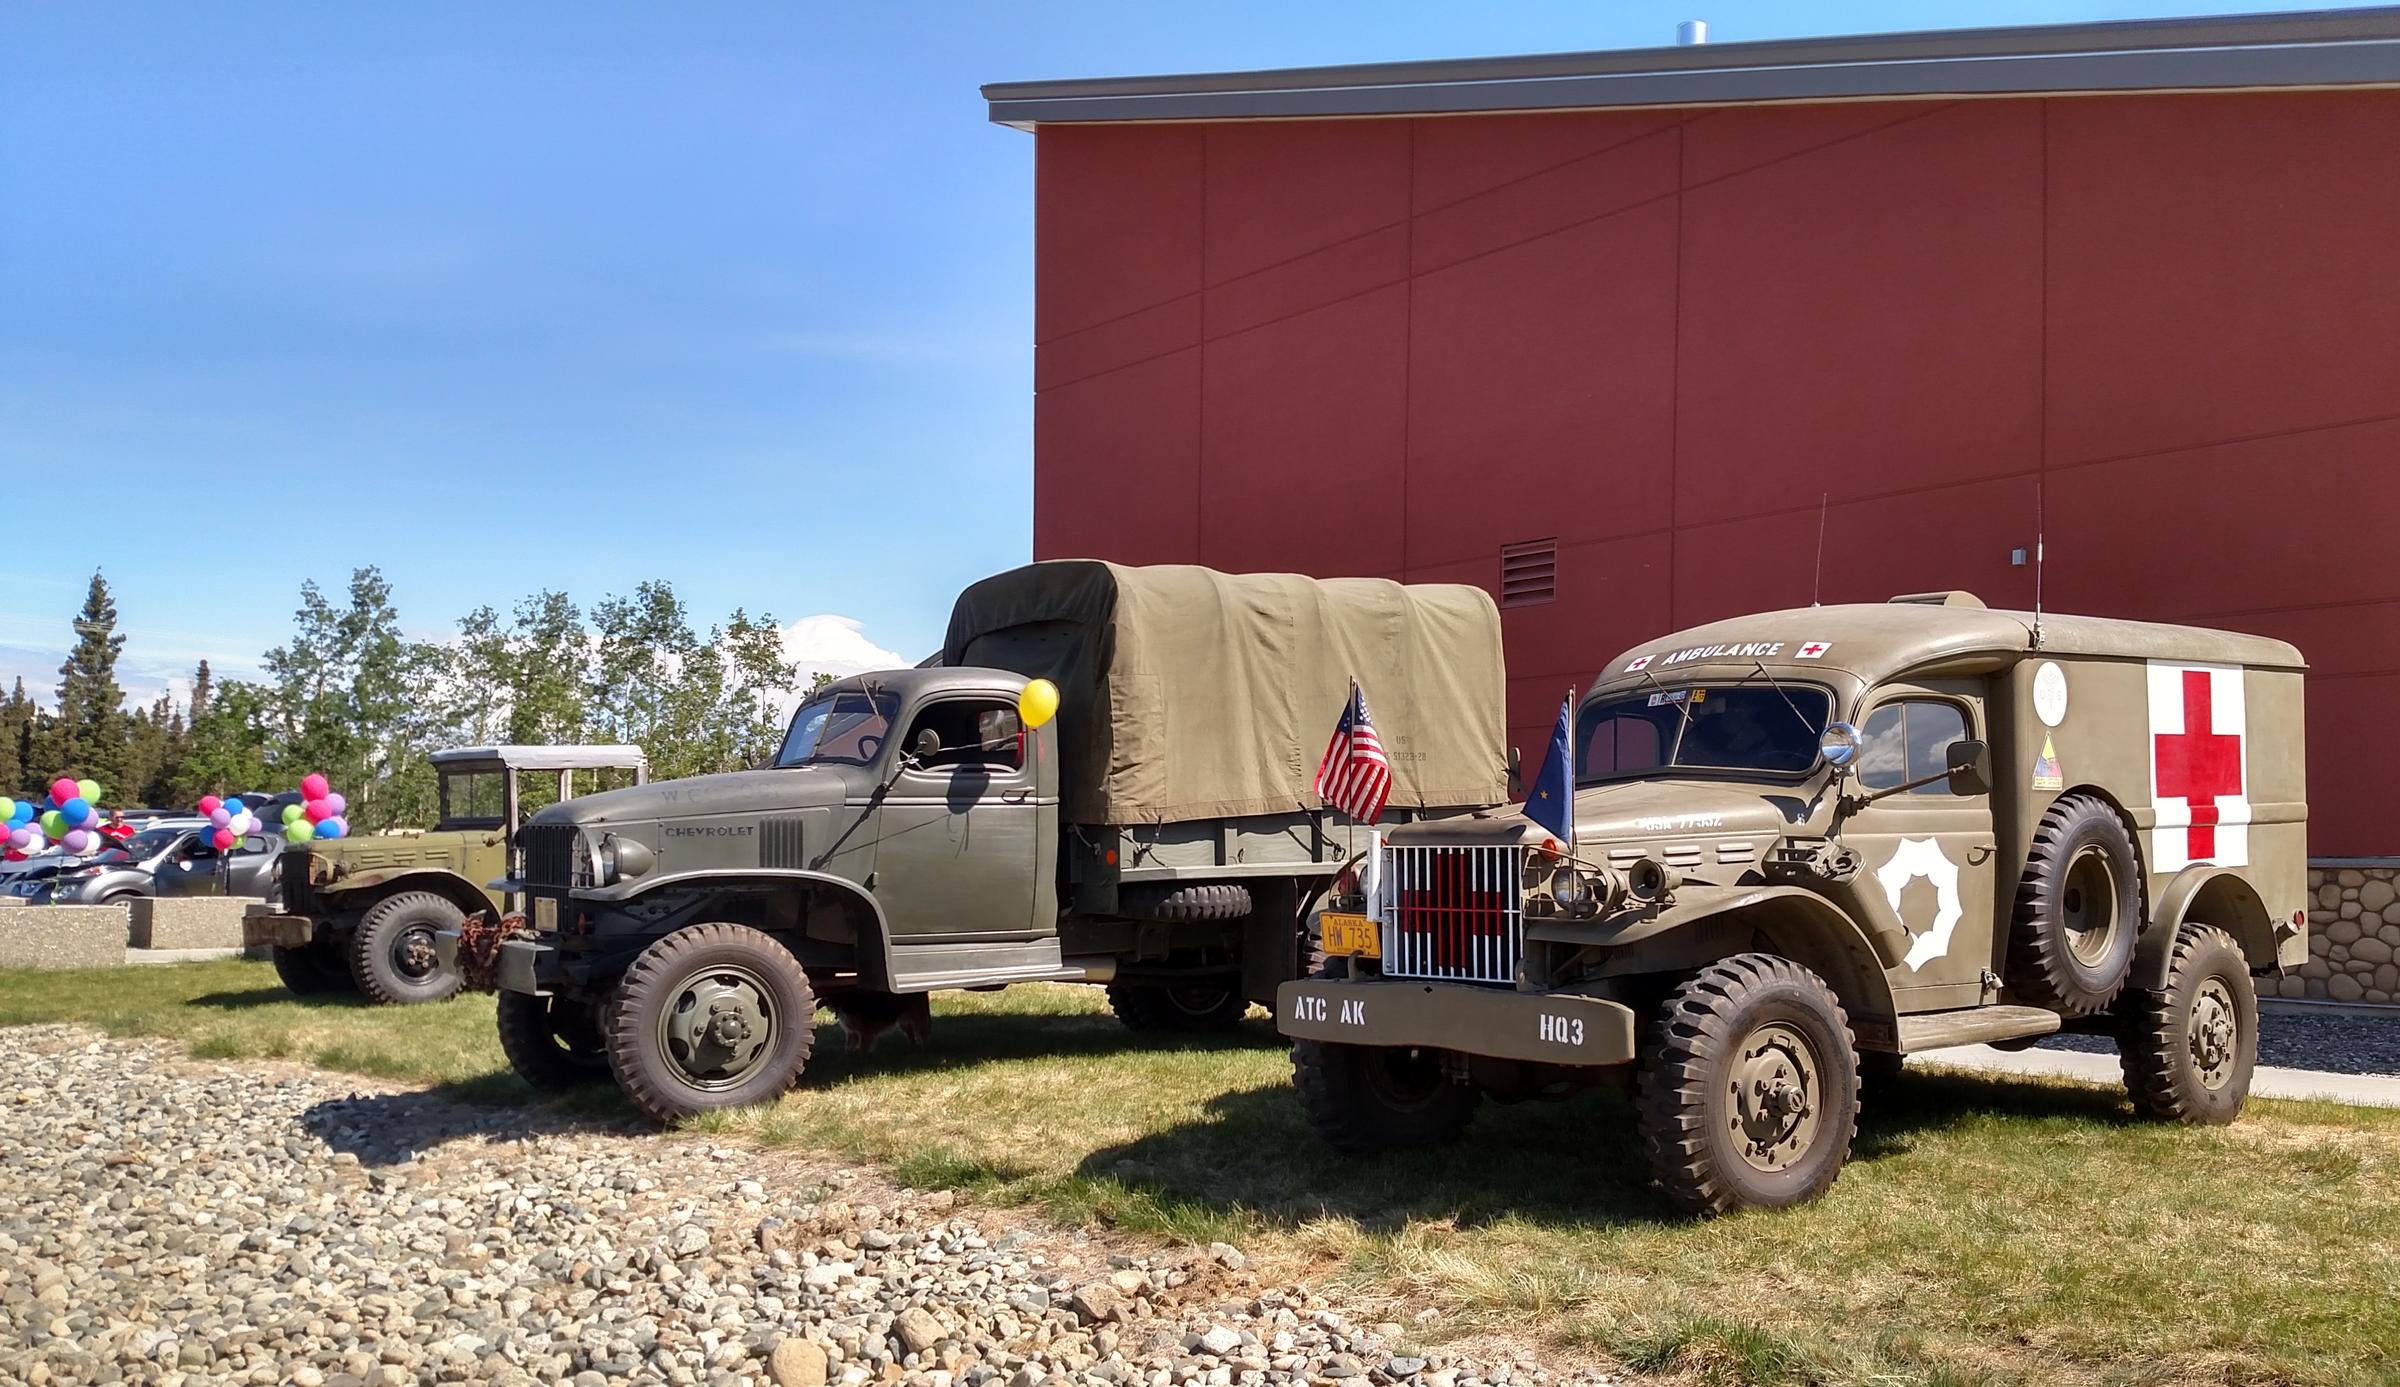 Owners of World War II-era Army trucks from Delta, Fairbanks and Anchorage brought their rigs and parked them in front of Fort Greely's Community Activity Center, where Saturday's ceremony was held, to lend an historically appropriate feel to the event. (Photo by Tim Ellis/KUAC)